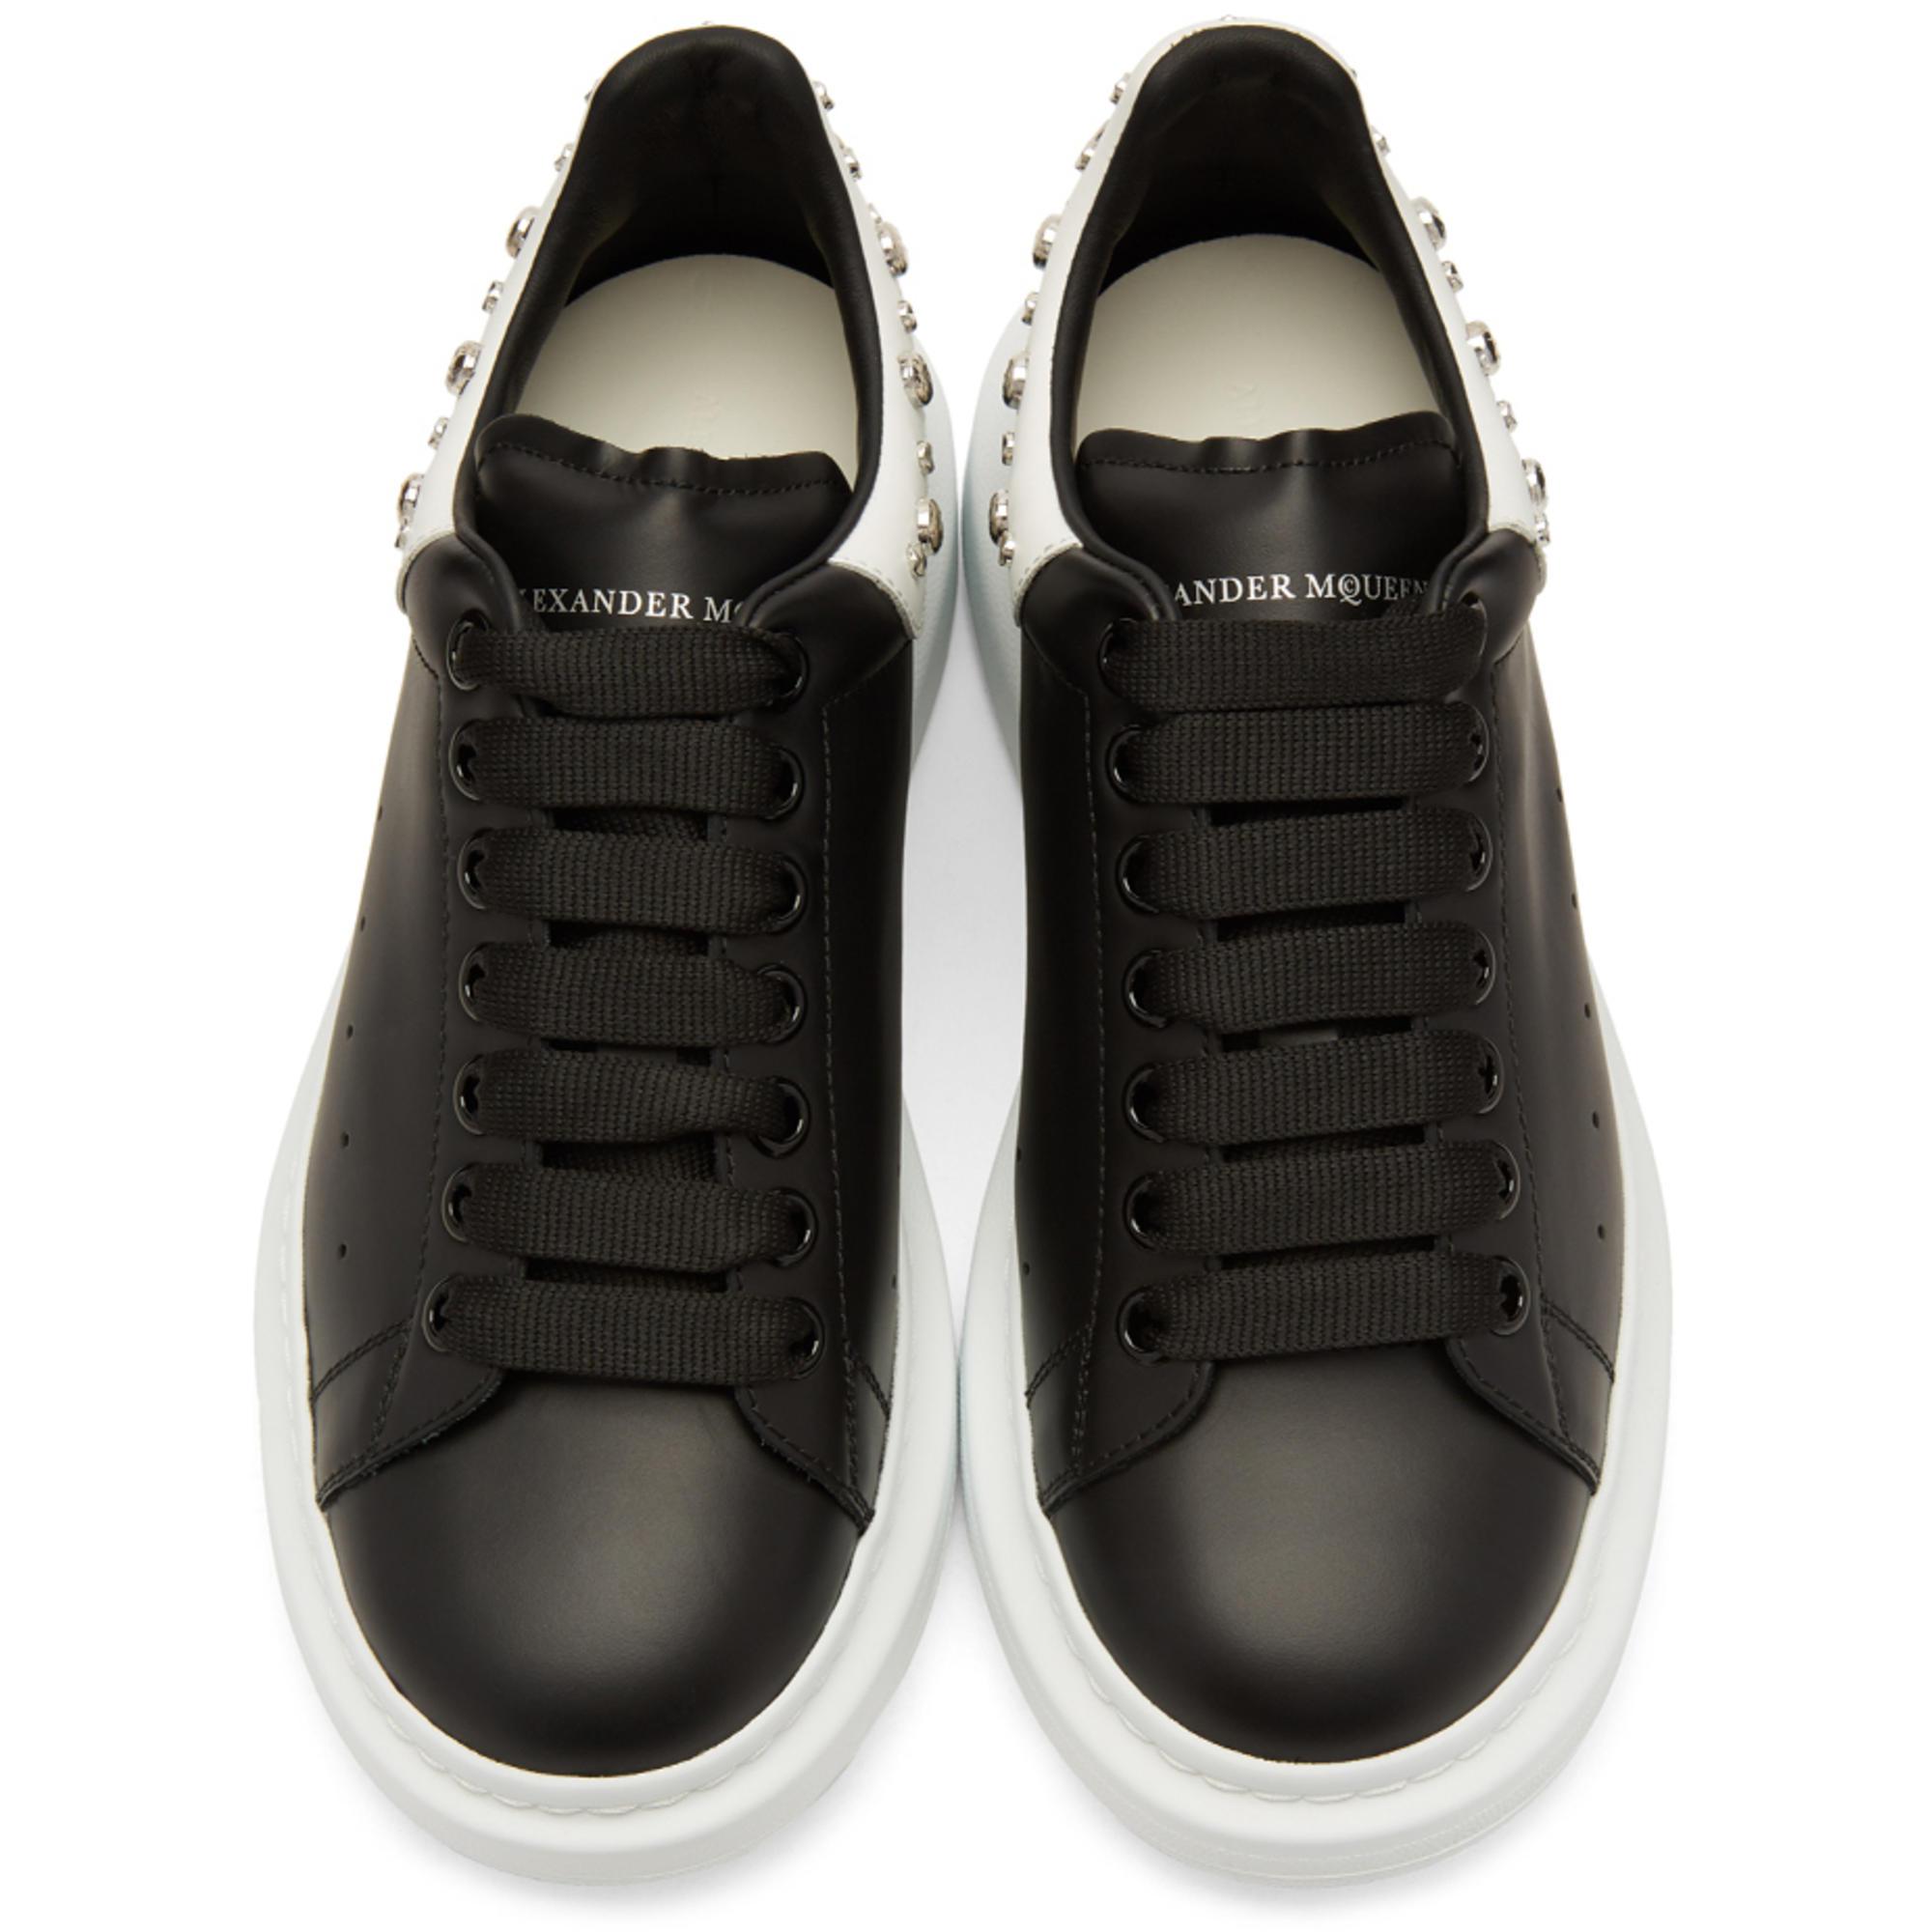 Alexander McQueen Leather Black And White Studded Oversized Sneakers - Lyst